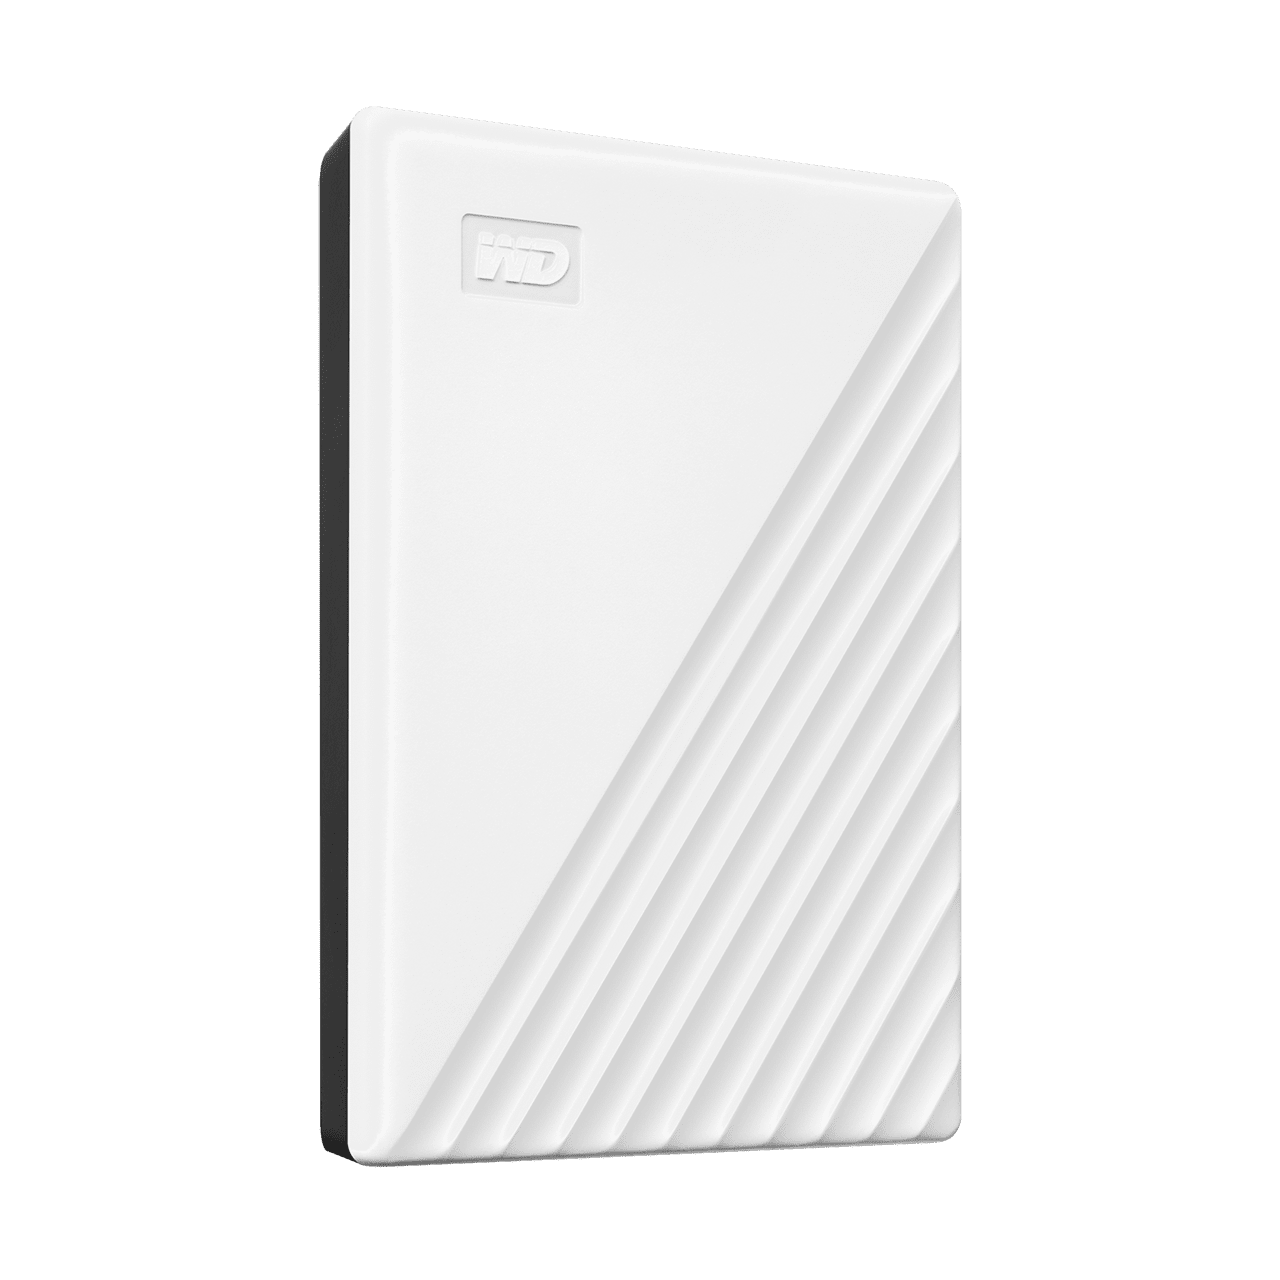 WD Western Digital My Passport 4TB Slim Portable External Hard Disk USB 3.0 With WD Backup Software & Password Protection - White